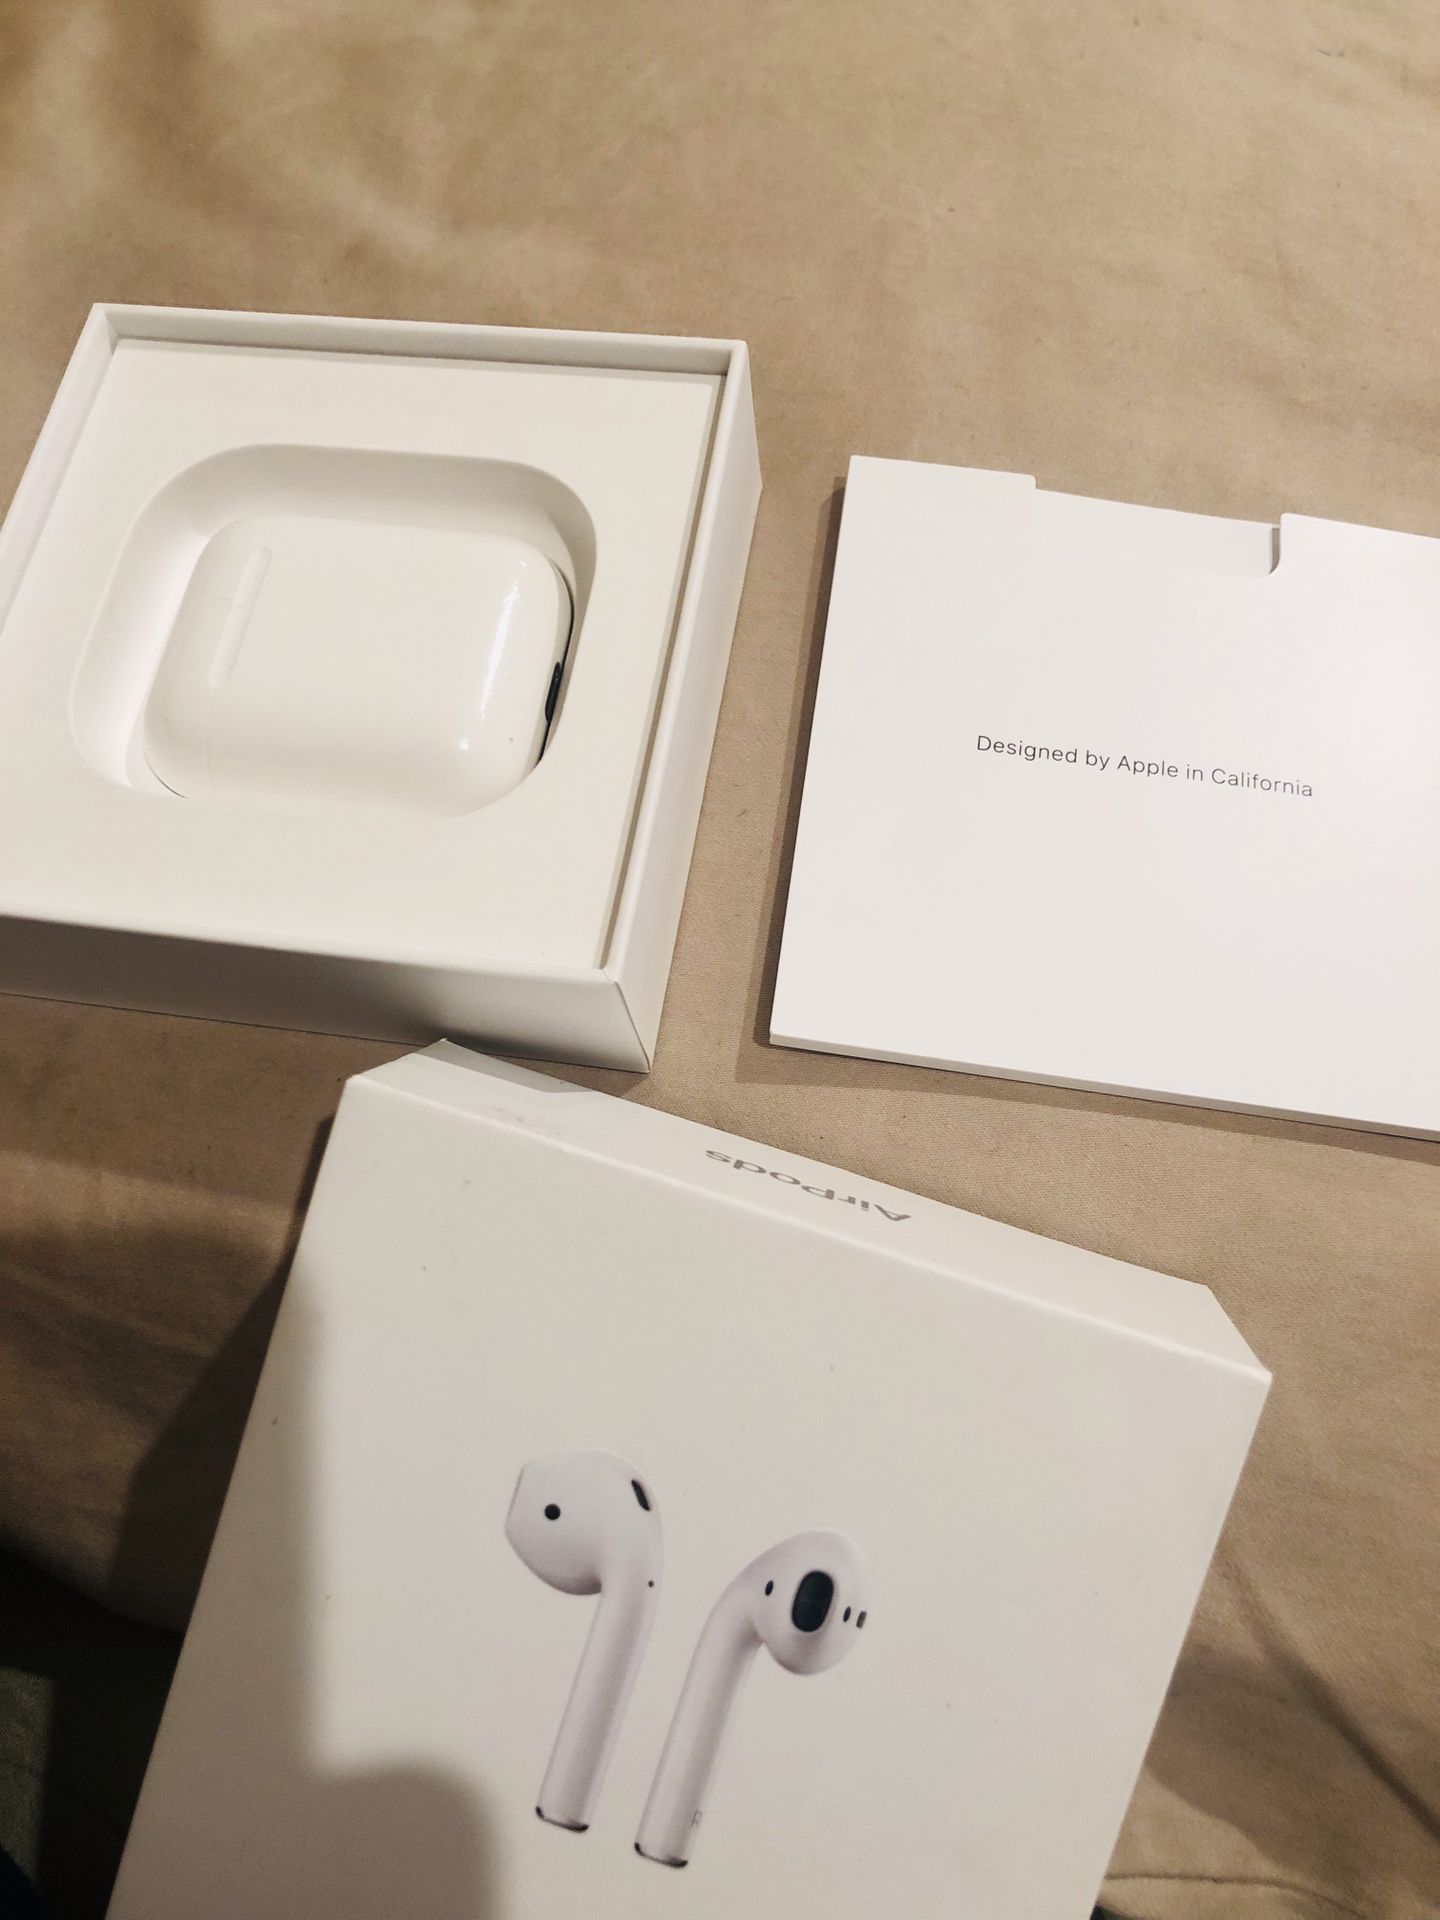 Apple AirPods brand new factory sealed